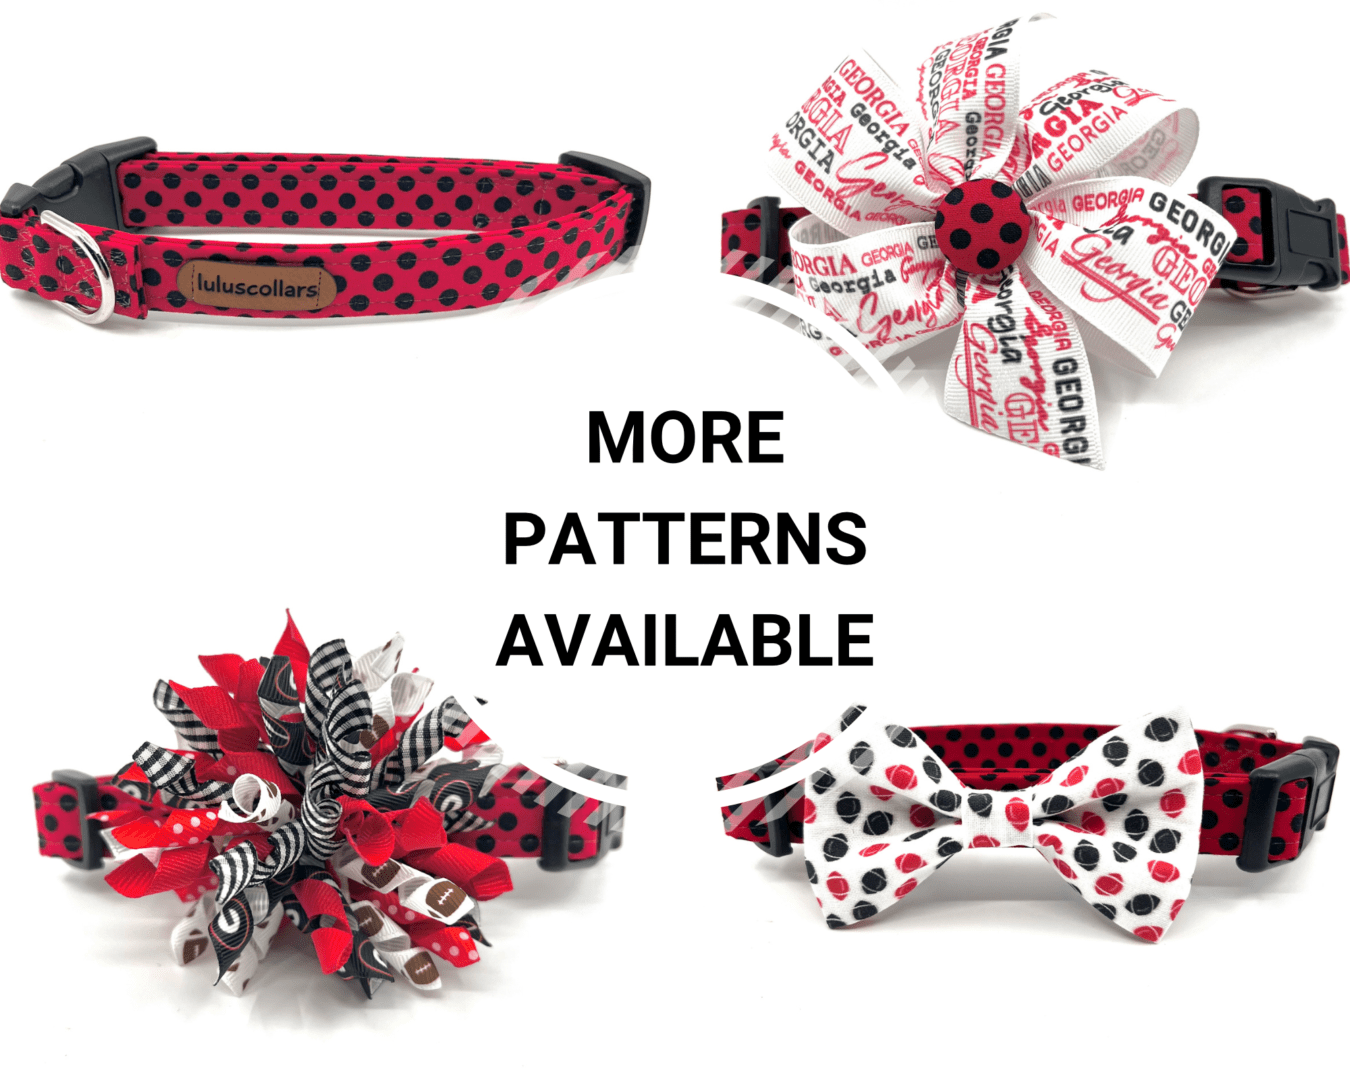 A variety of dog collars and bows are available.